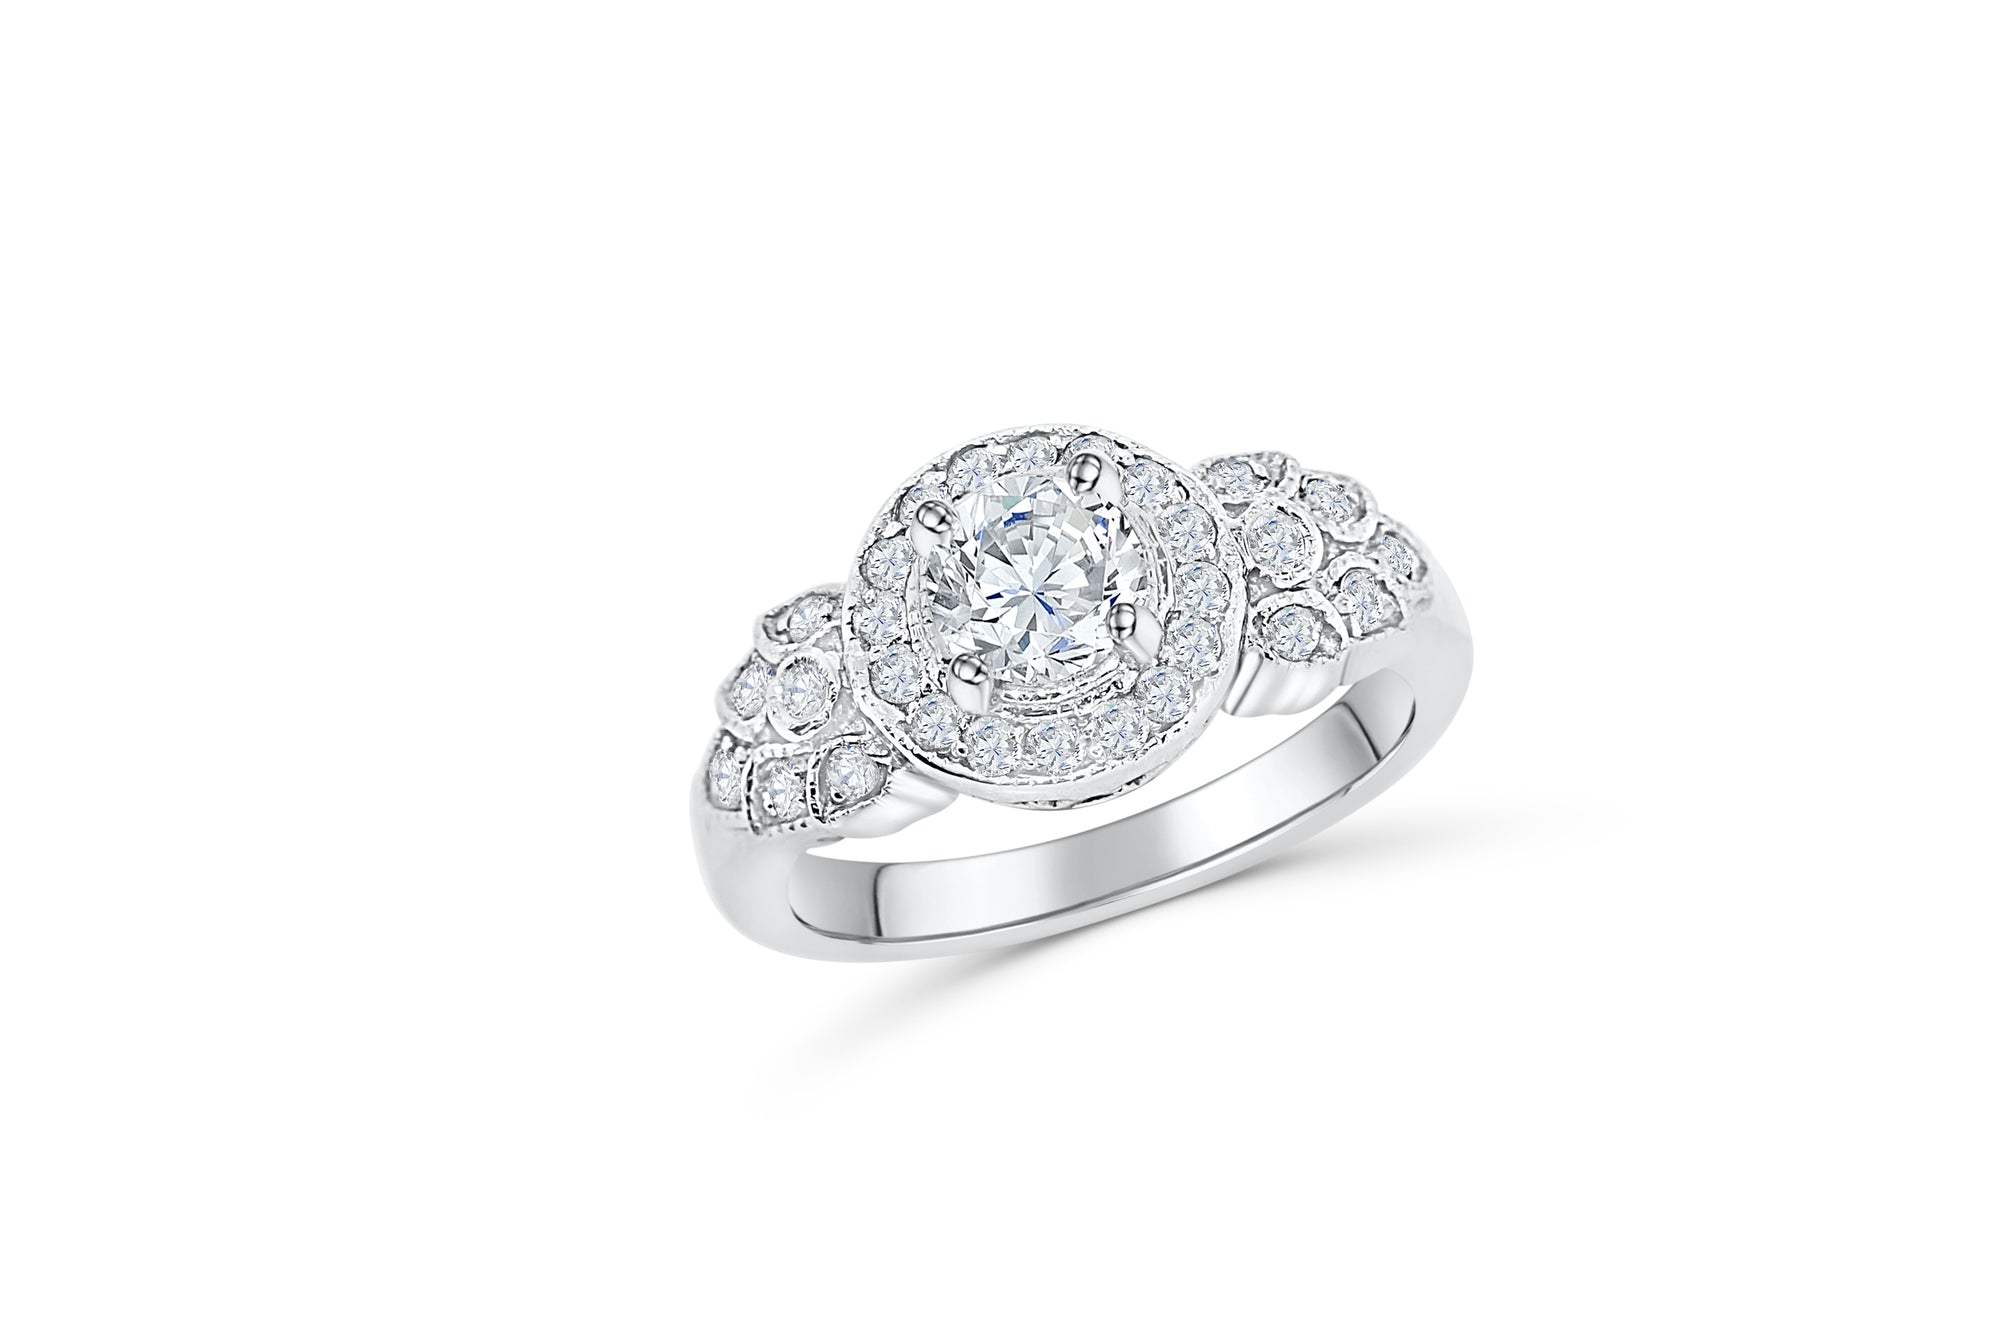 Diamond Engagement Ring 0.99 CT TW 14k White Gold DENG065 - NorthandSouthJewelry